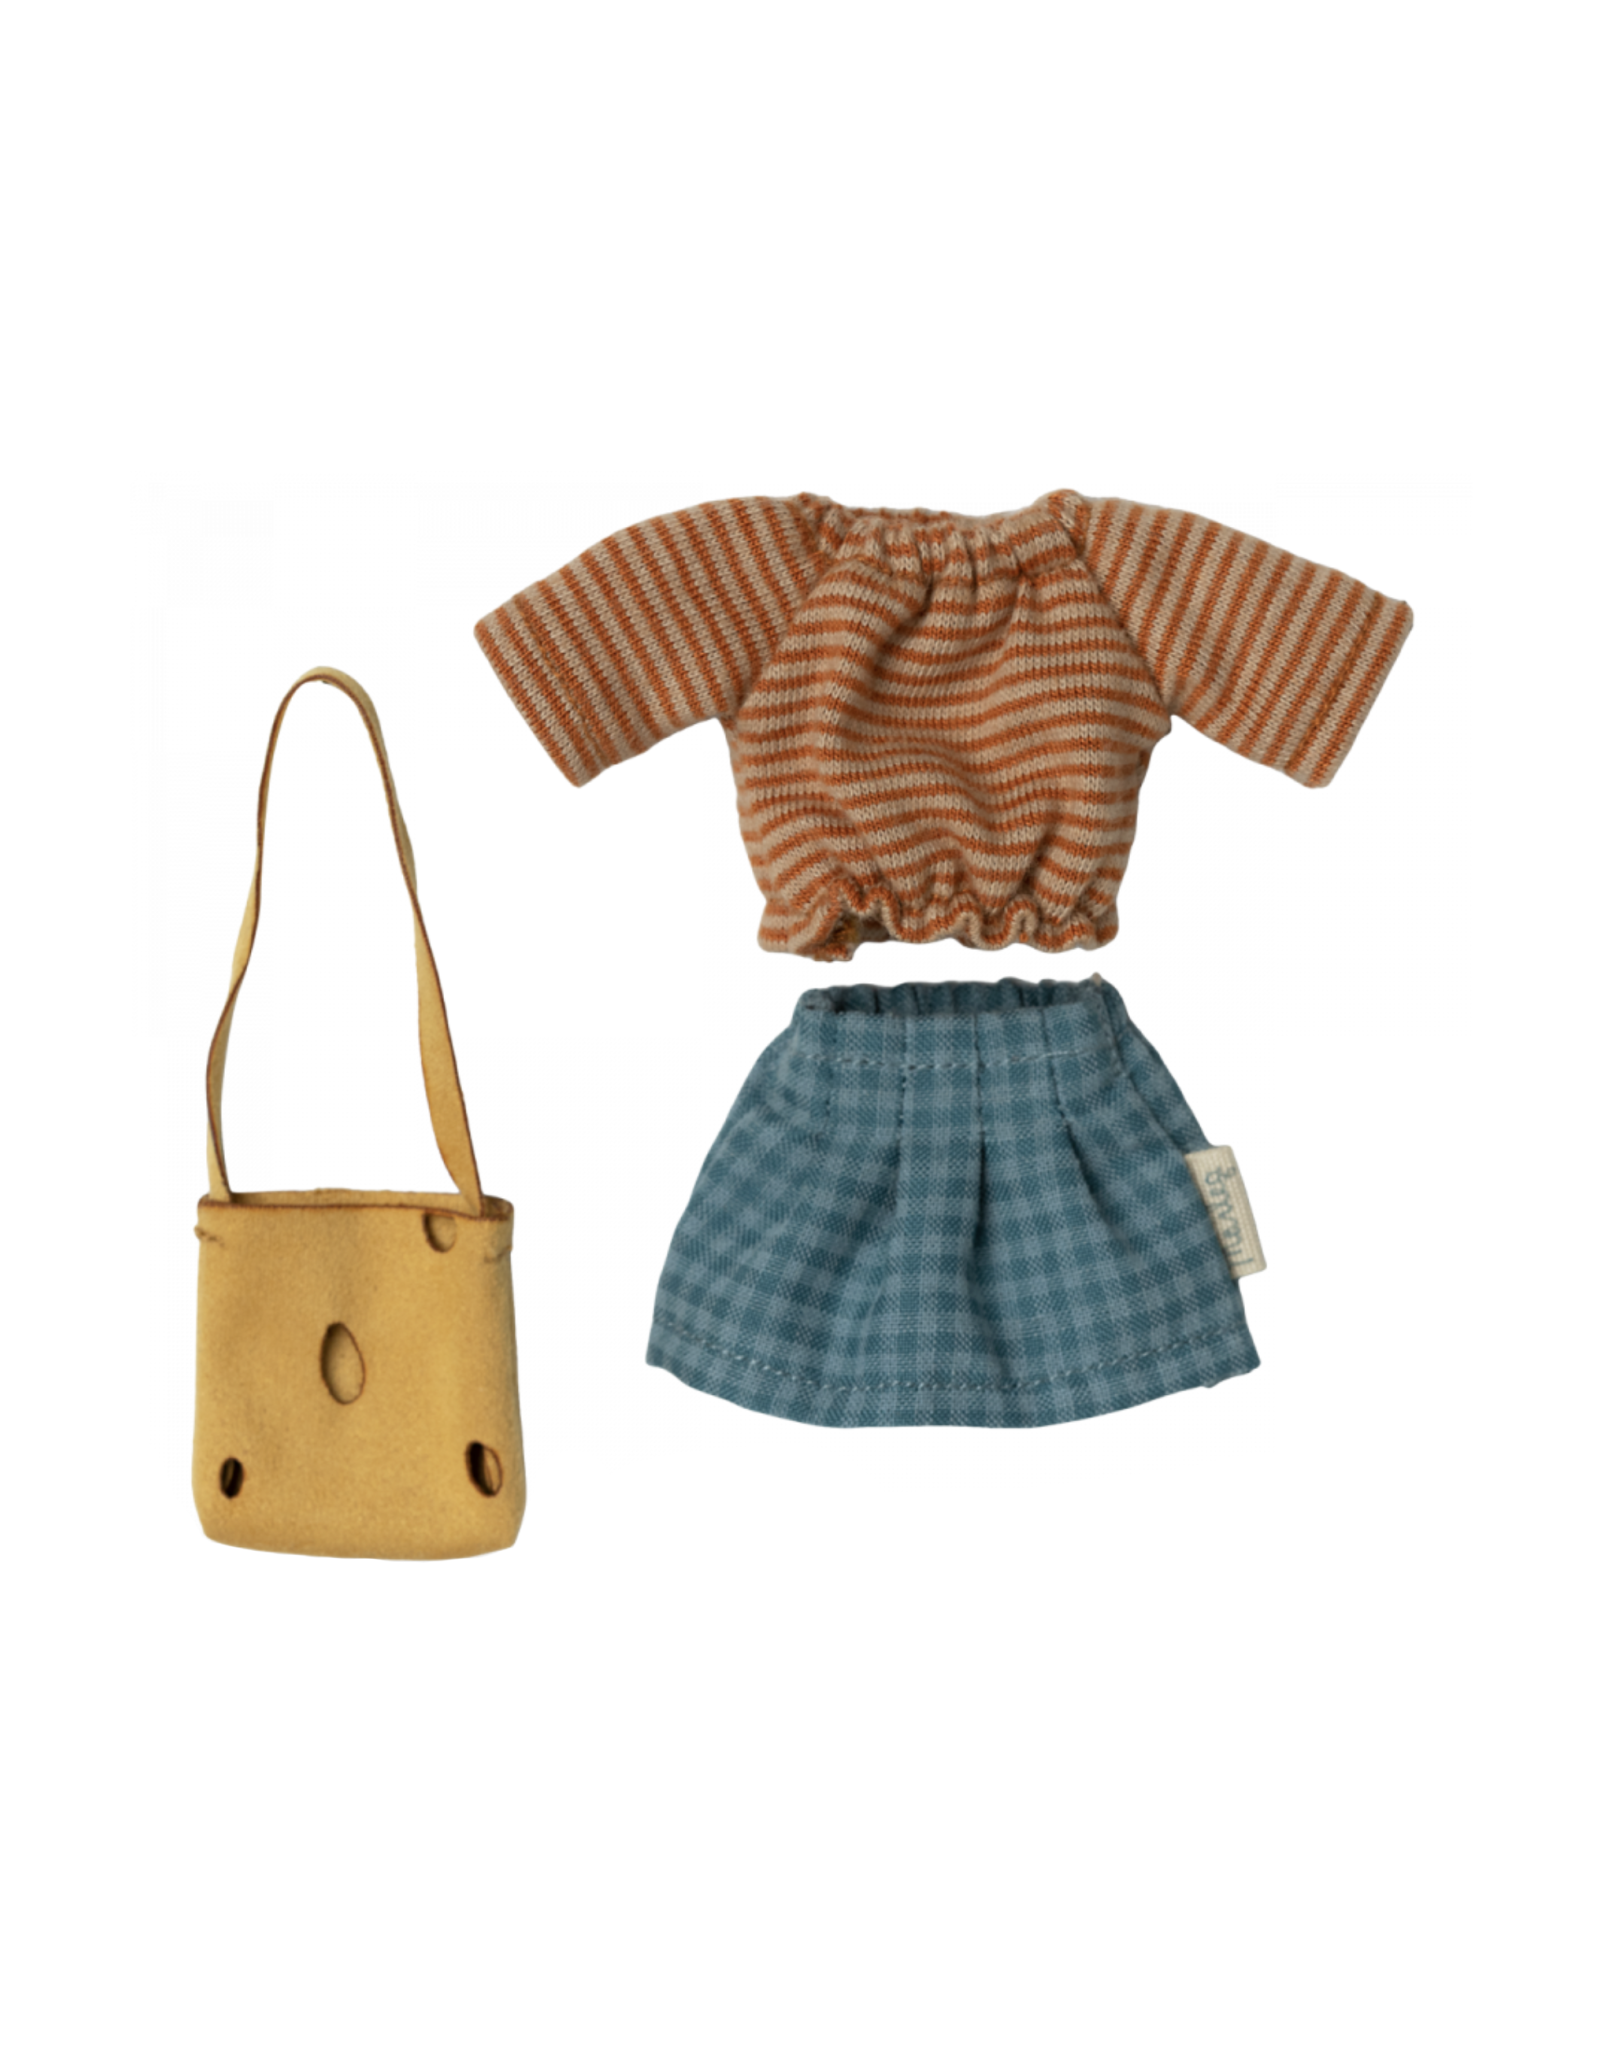 Maileg Mum Mouse Clothes - Striped Top + Teal Plaid Skirt